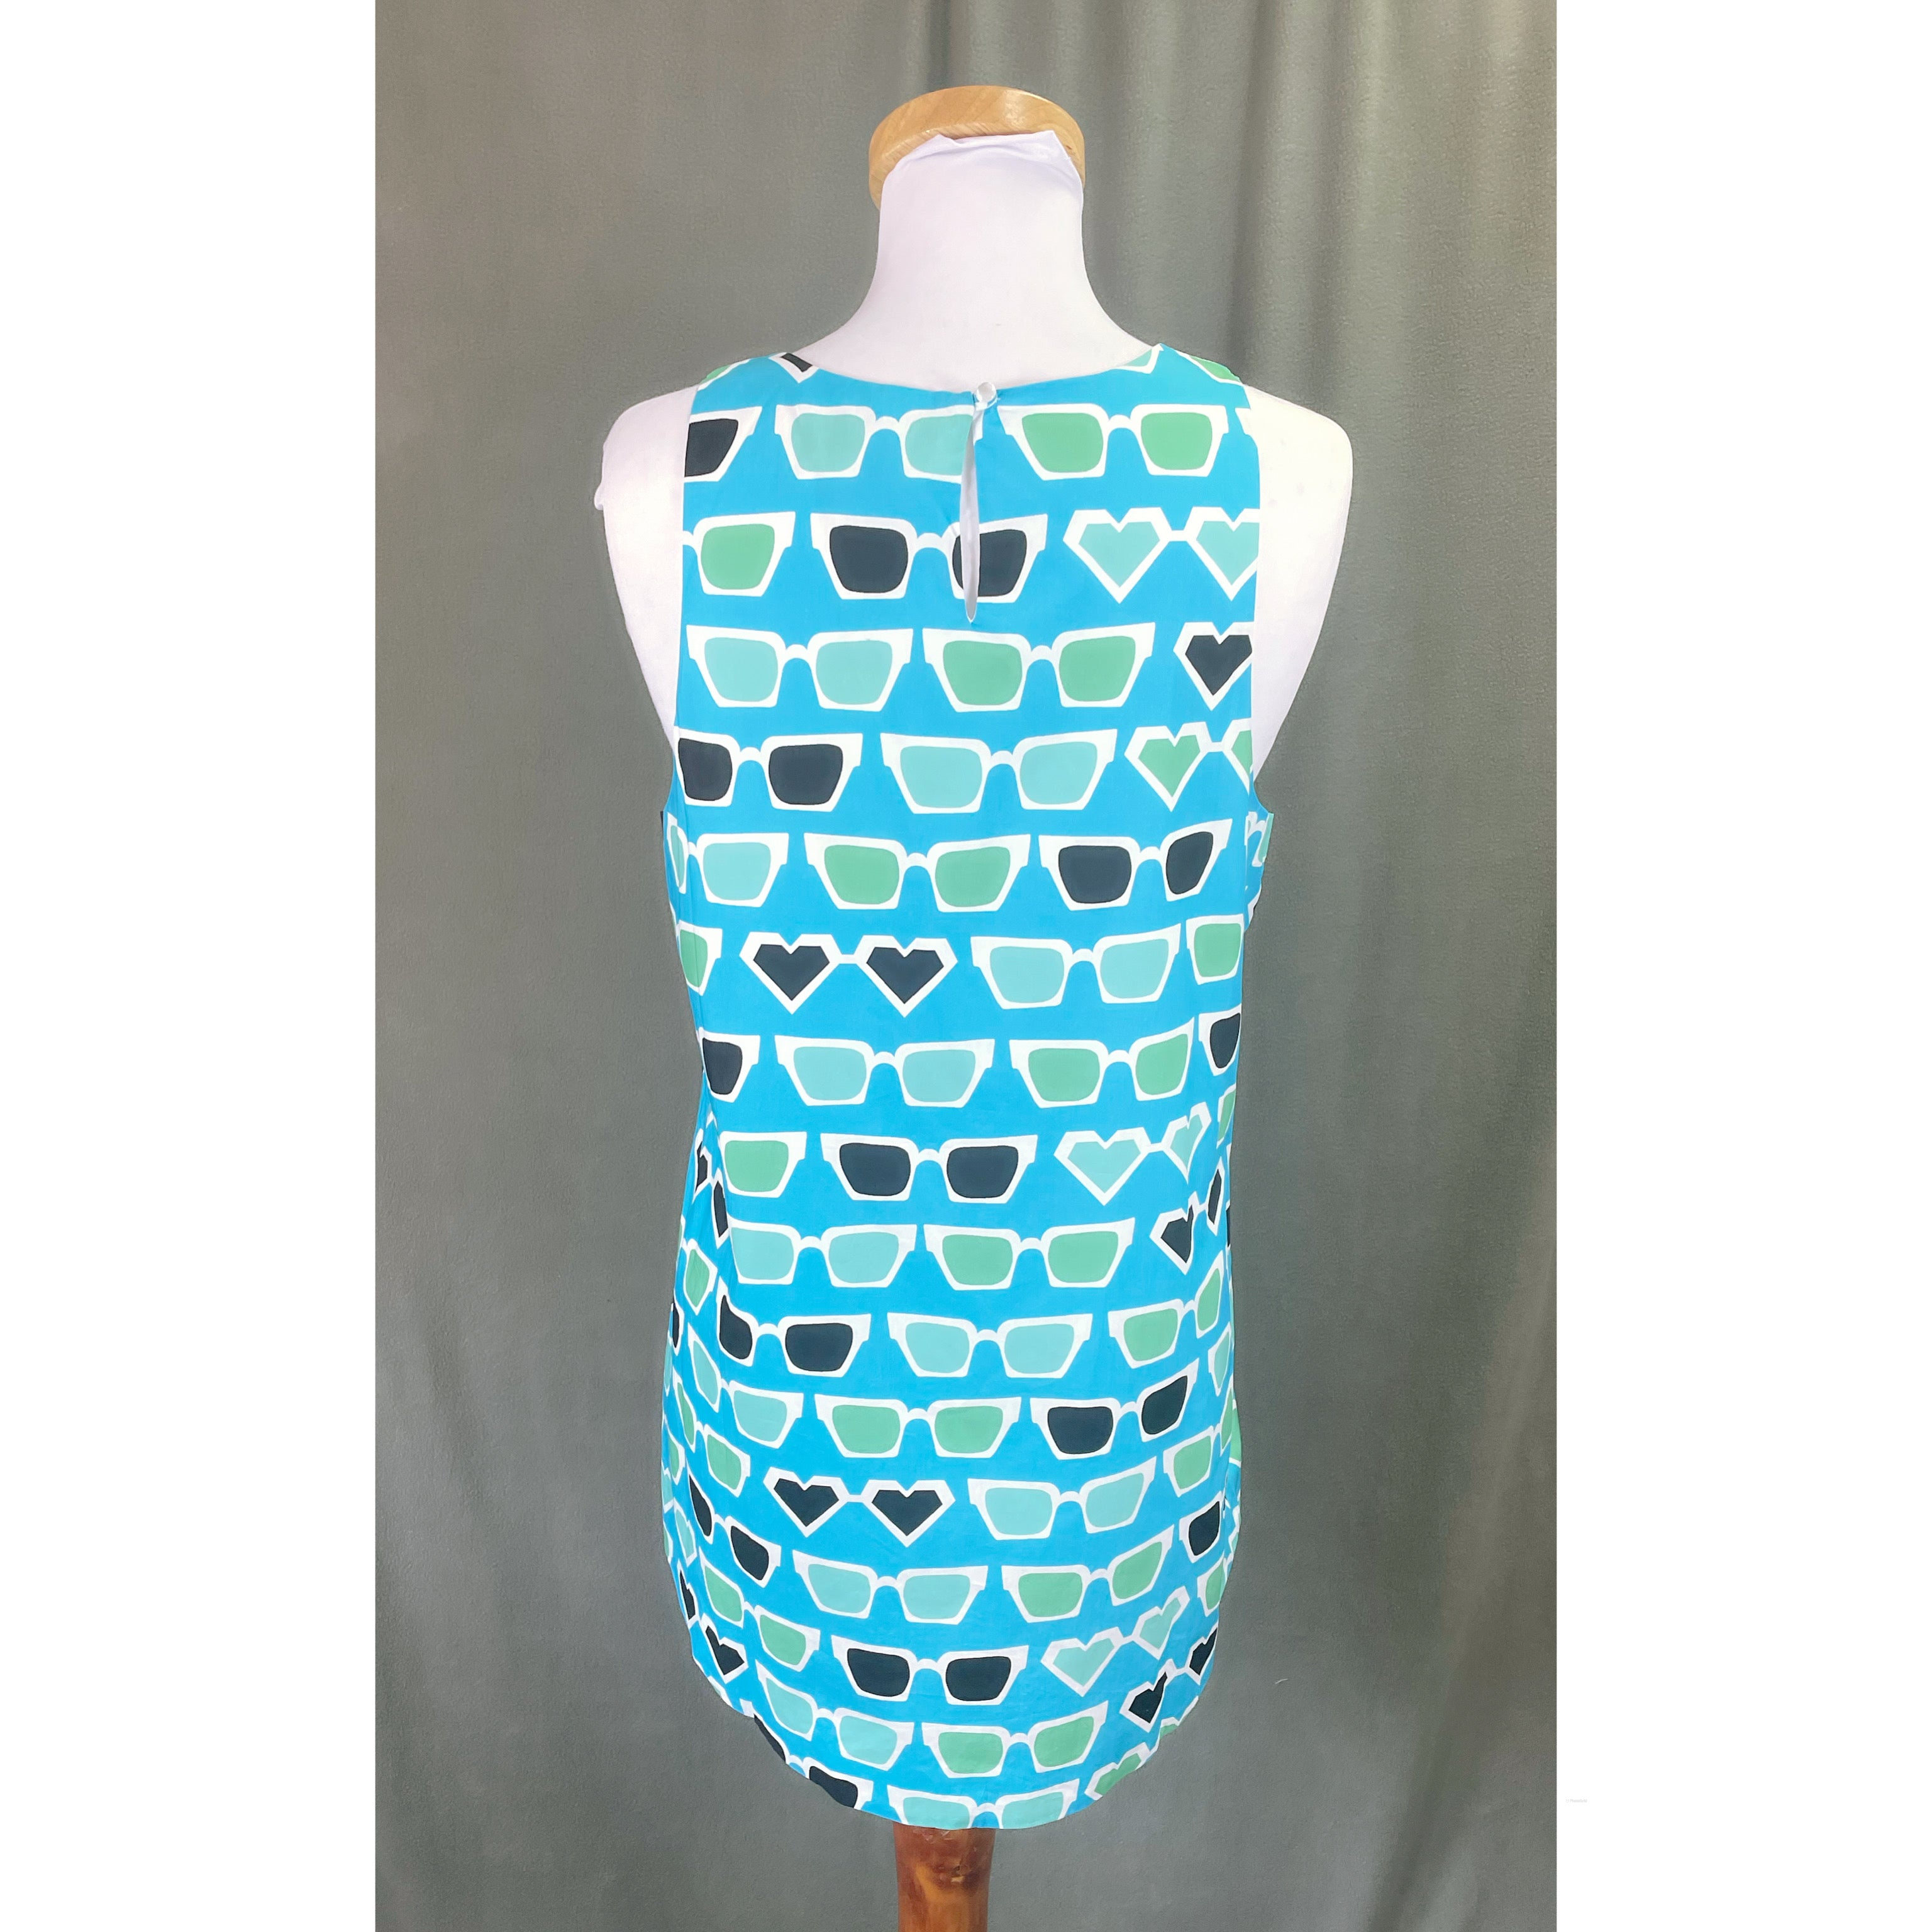 Tyler Boe turquoise sunglass print blouse, size M, NEW WITH TAGS!